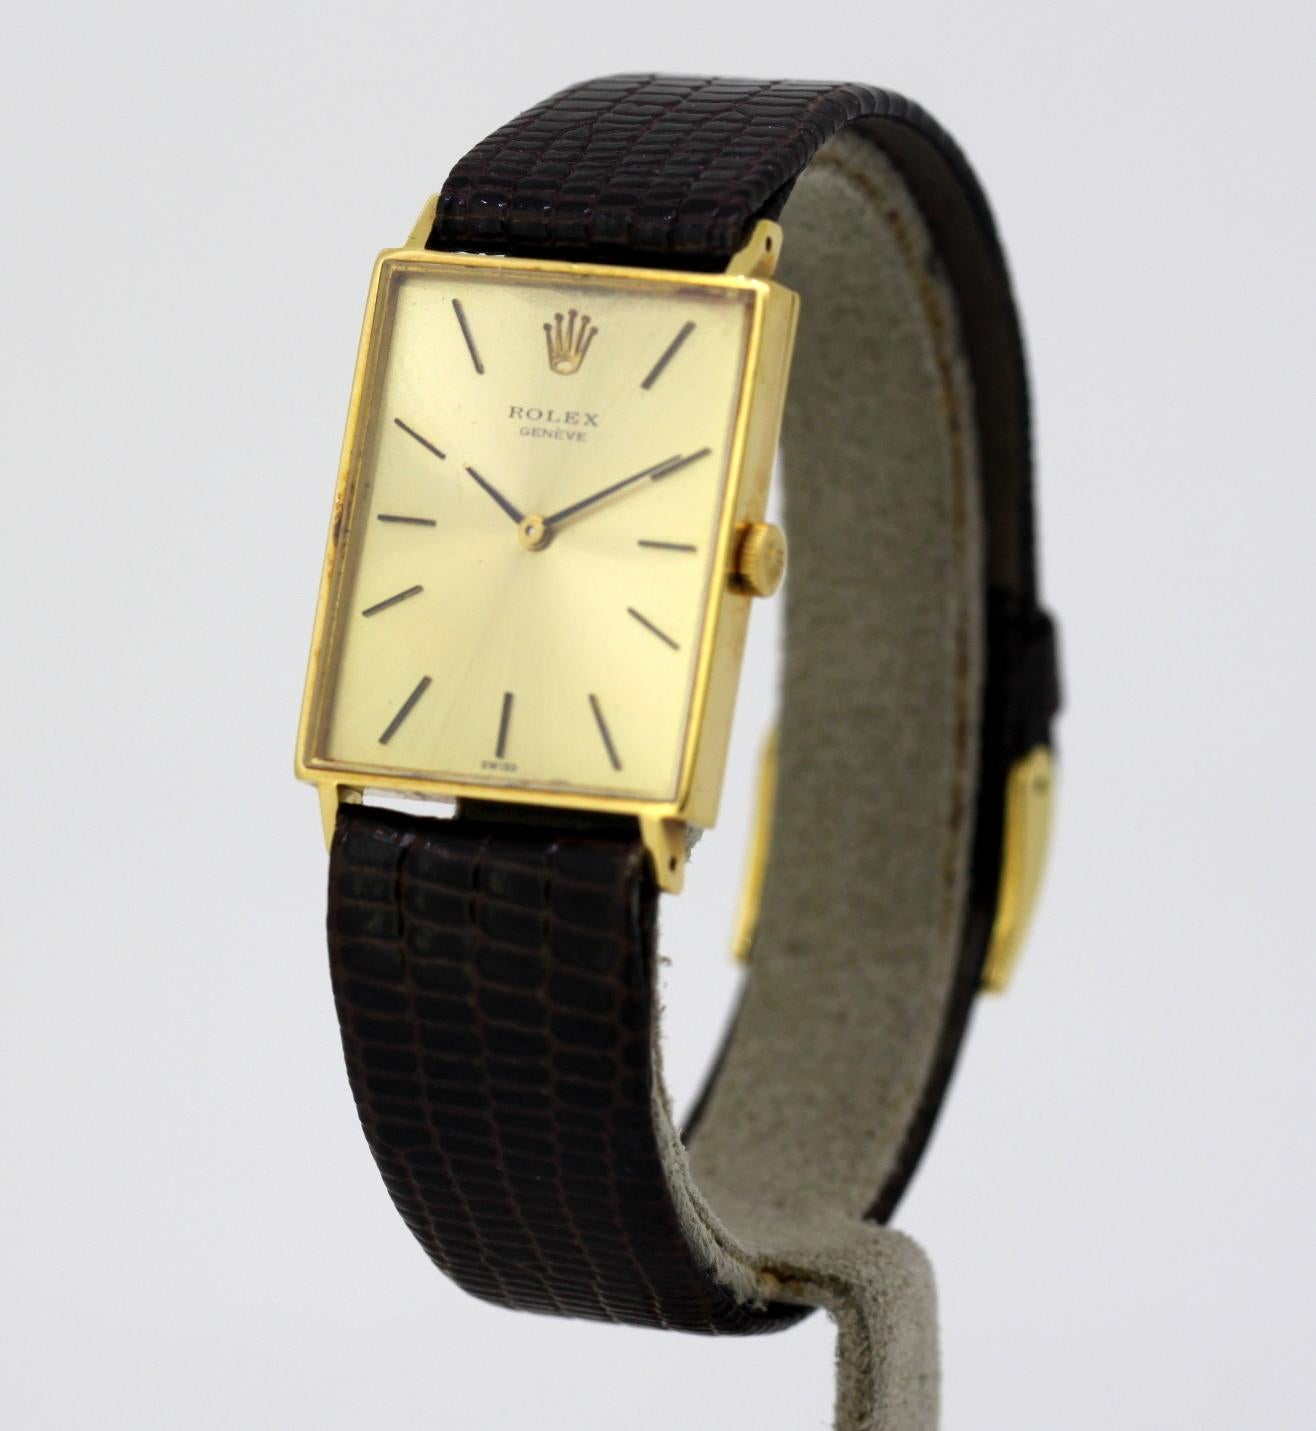 Vintage ladies Rolex wristwatch in 18k yellow gold
Circa 1960's

Reference Number: J3834
Gender:	Ladies
Case Size : 23 mm
Movement: Manual Winding
Watchband Material: Leather
Case material : 18k gold
Display Type:	Analogue	
Age: 1960's
Dial: Gold